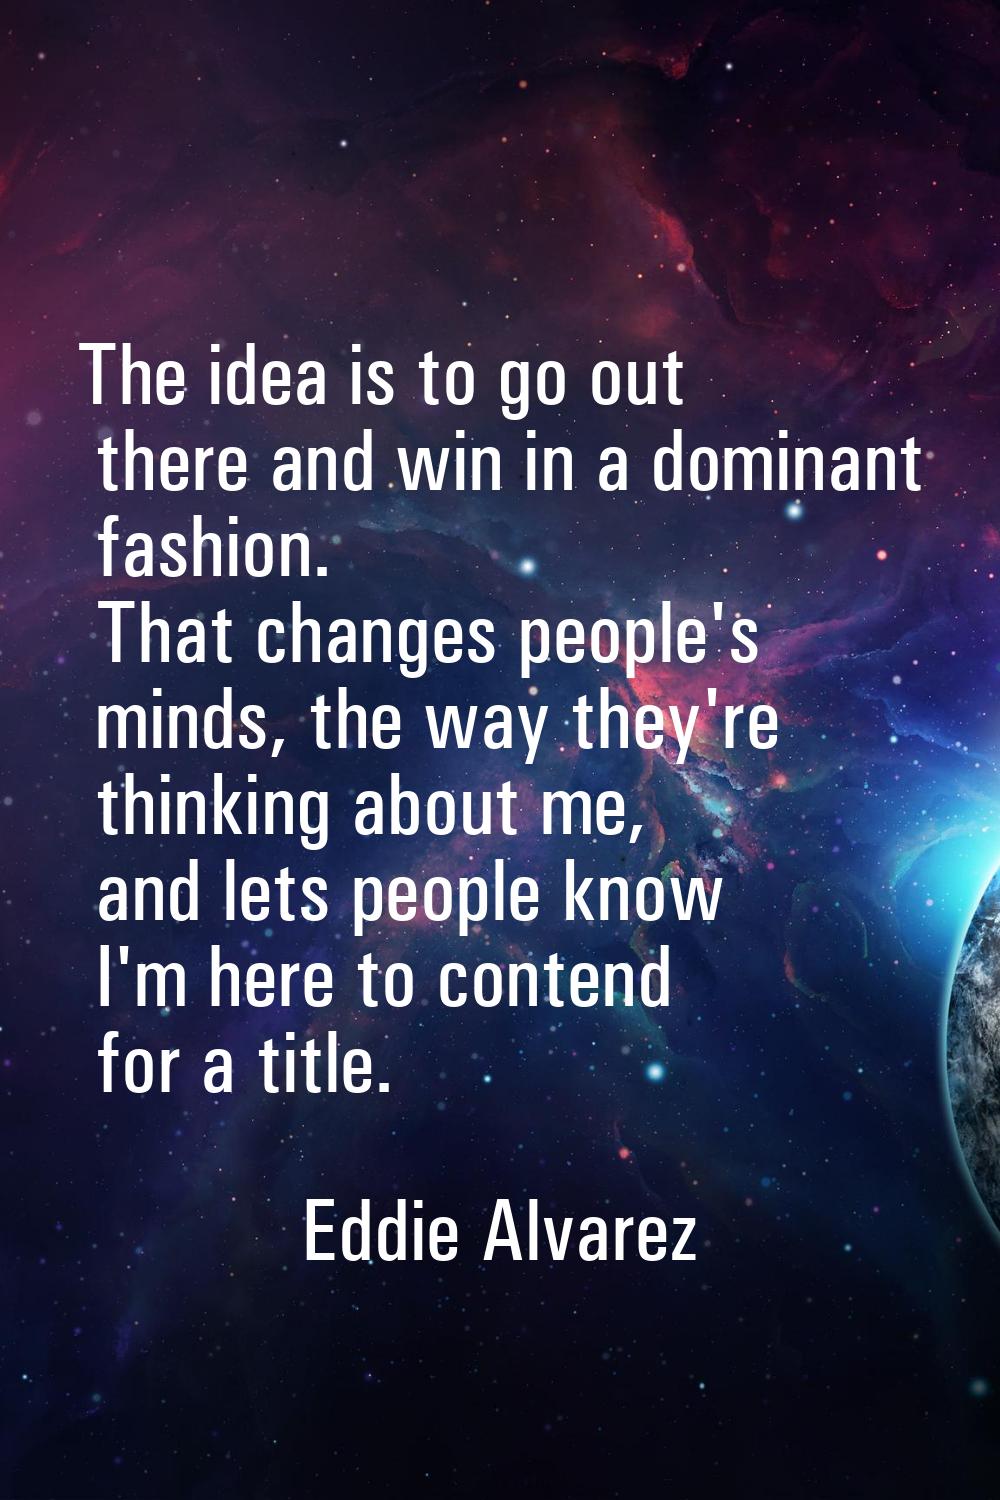 The idea is to go out there and win in a dominant fashion. That changes people's minds, the way the